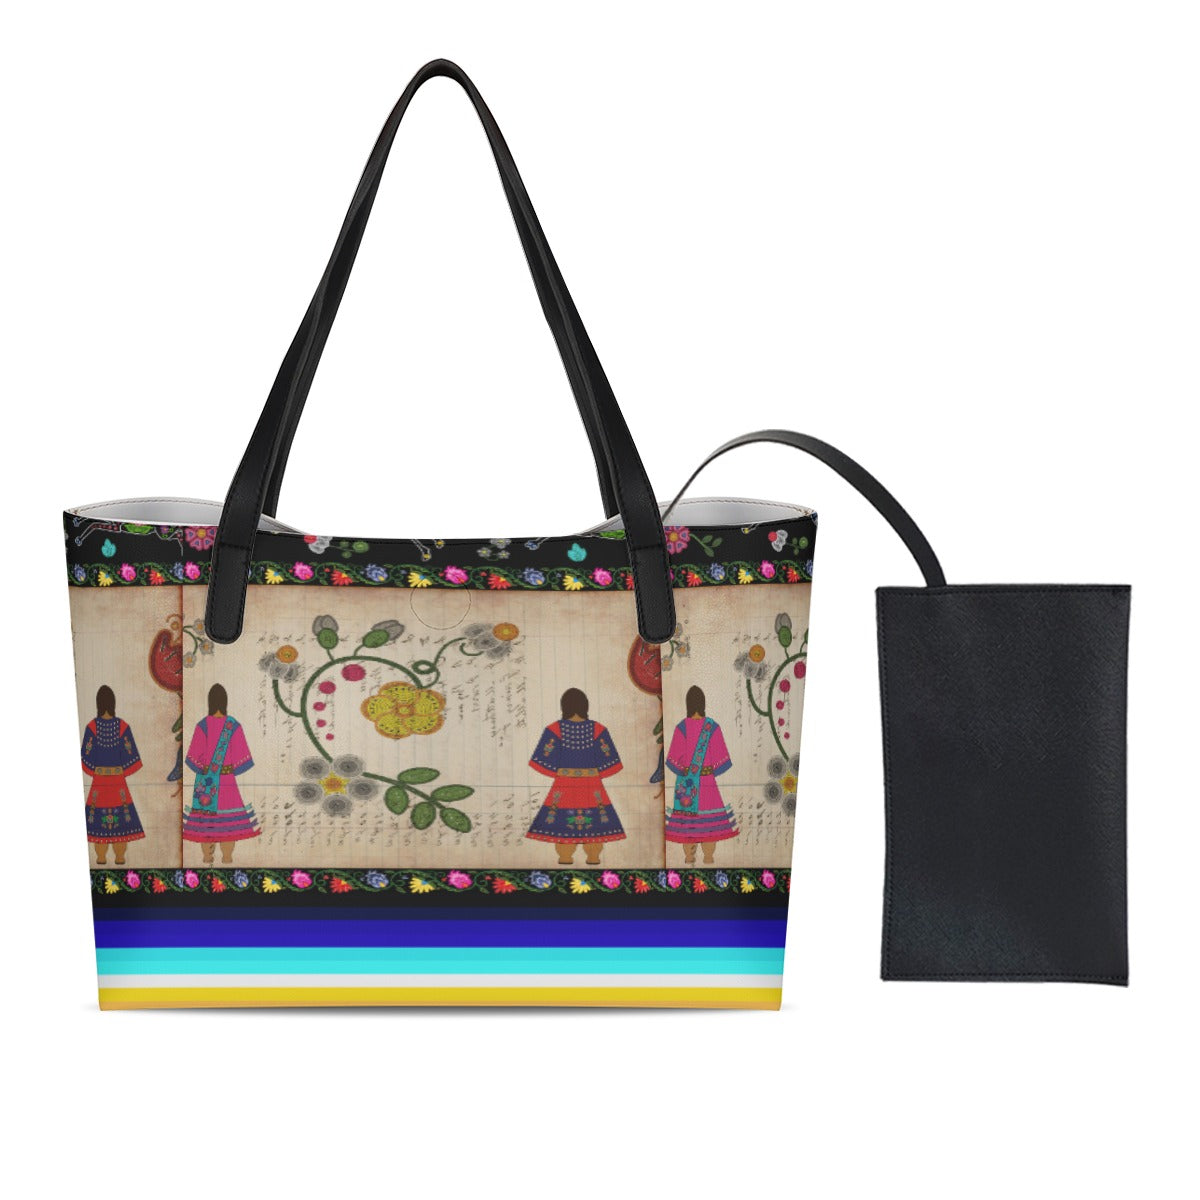 Floral Ledger Sisters Shopping Tote Bag With Black Mini Purse